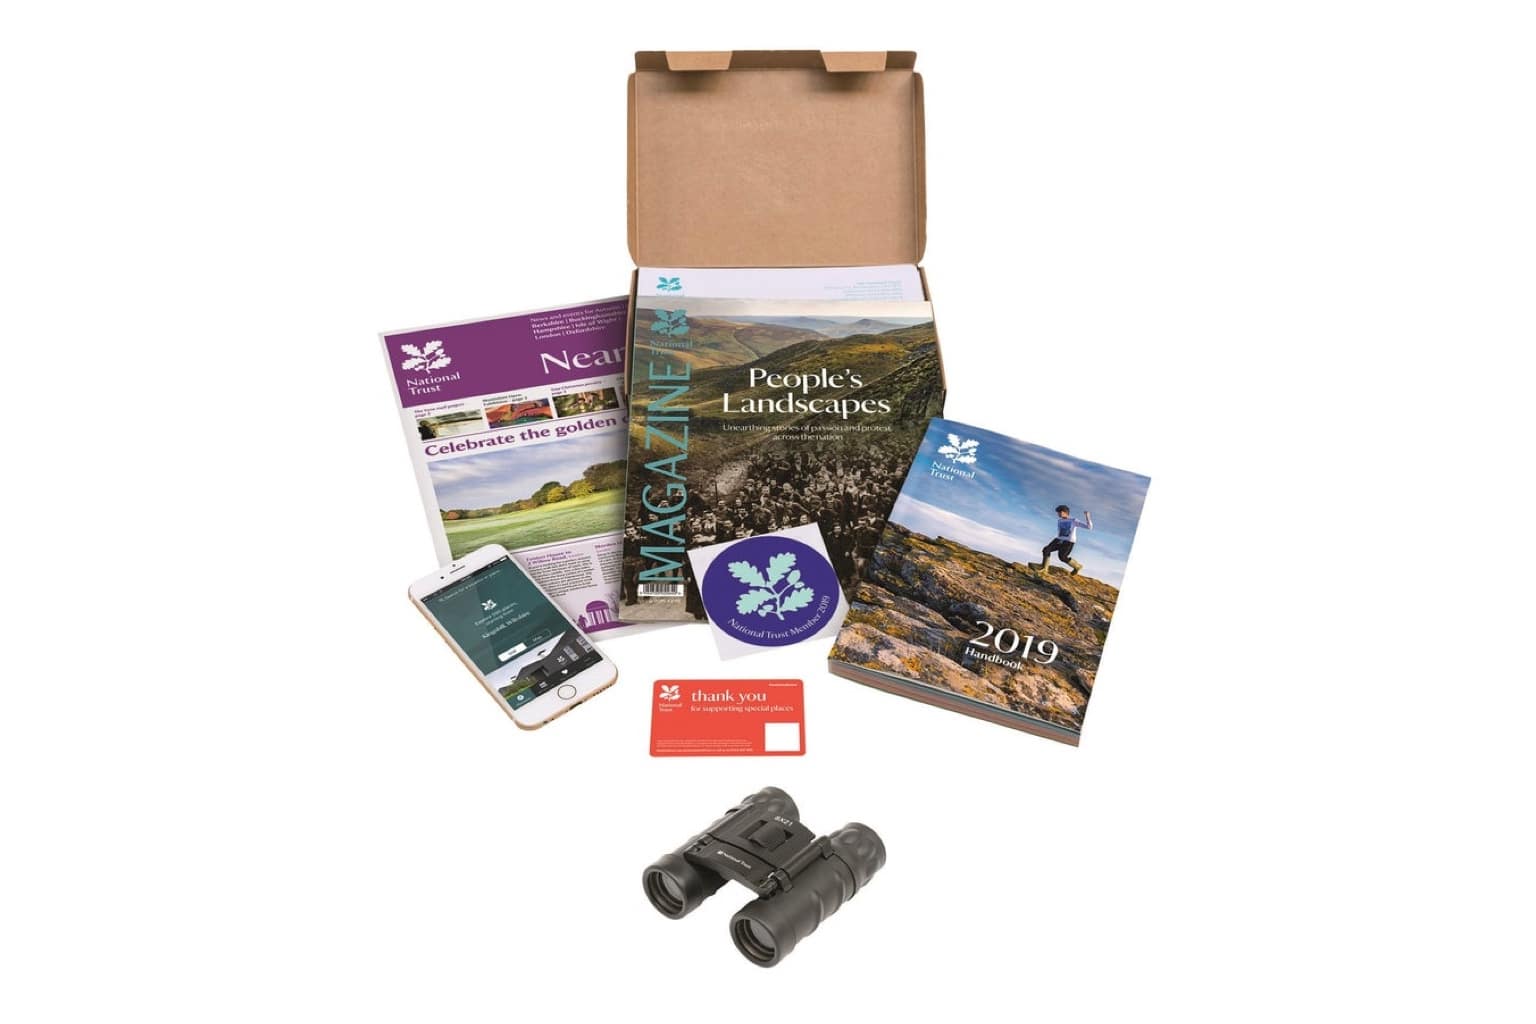 Charity Gifts from The National Trust